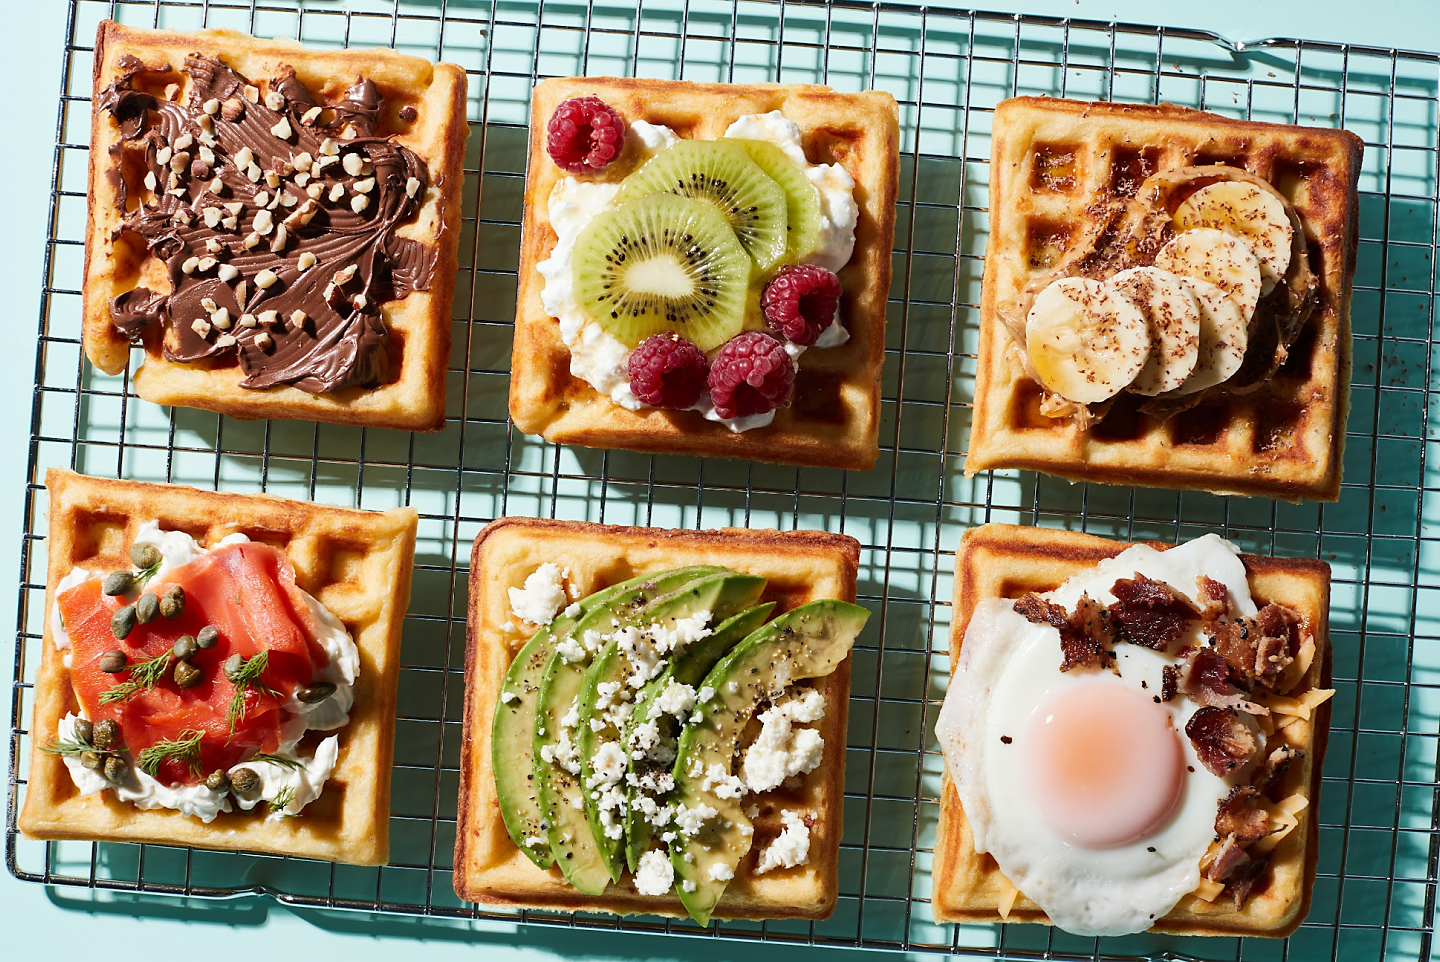 Yummly image of variety of toppings for belgian waffles